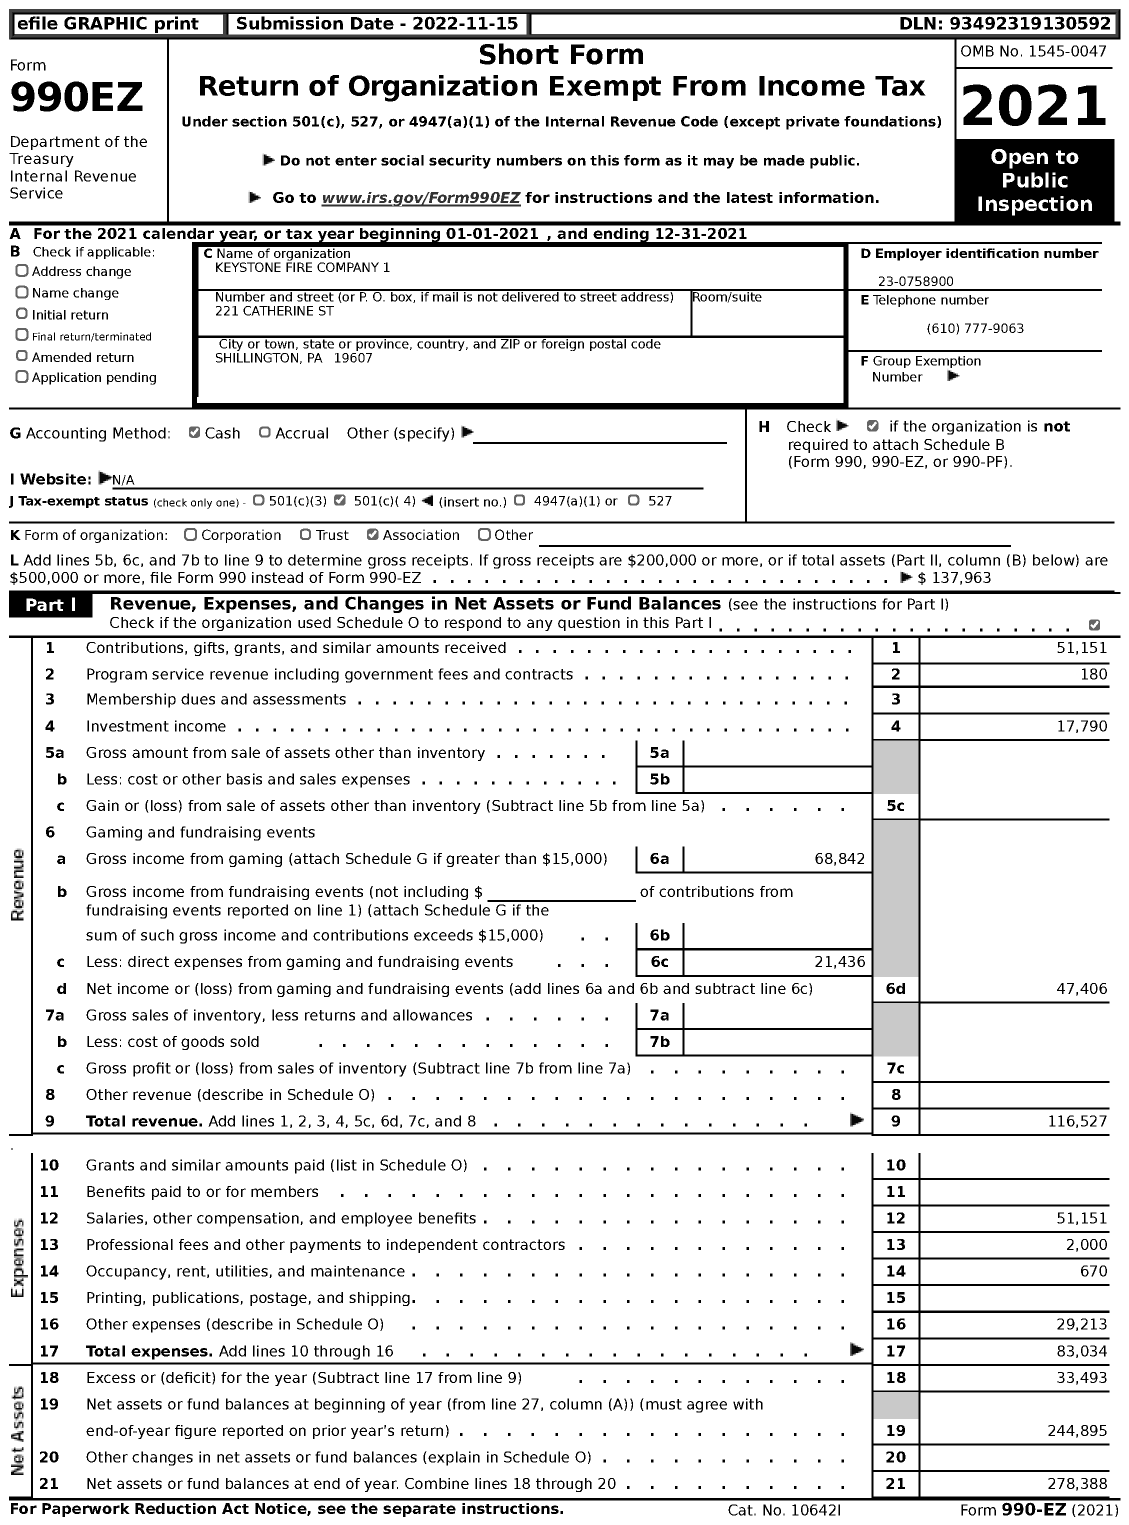 Image of first page of 2021 Form 990EZ for Keystone Fire Company 1